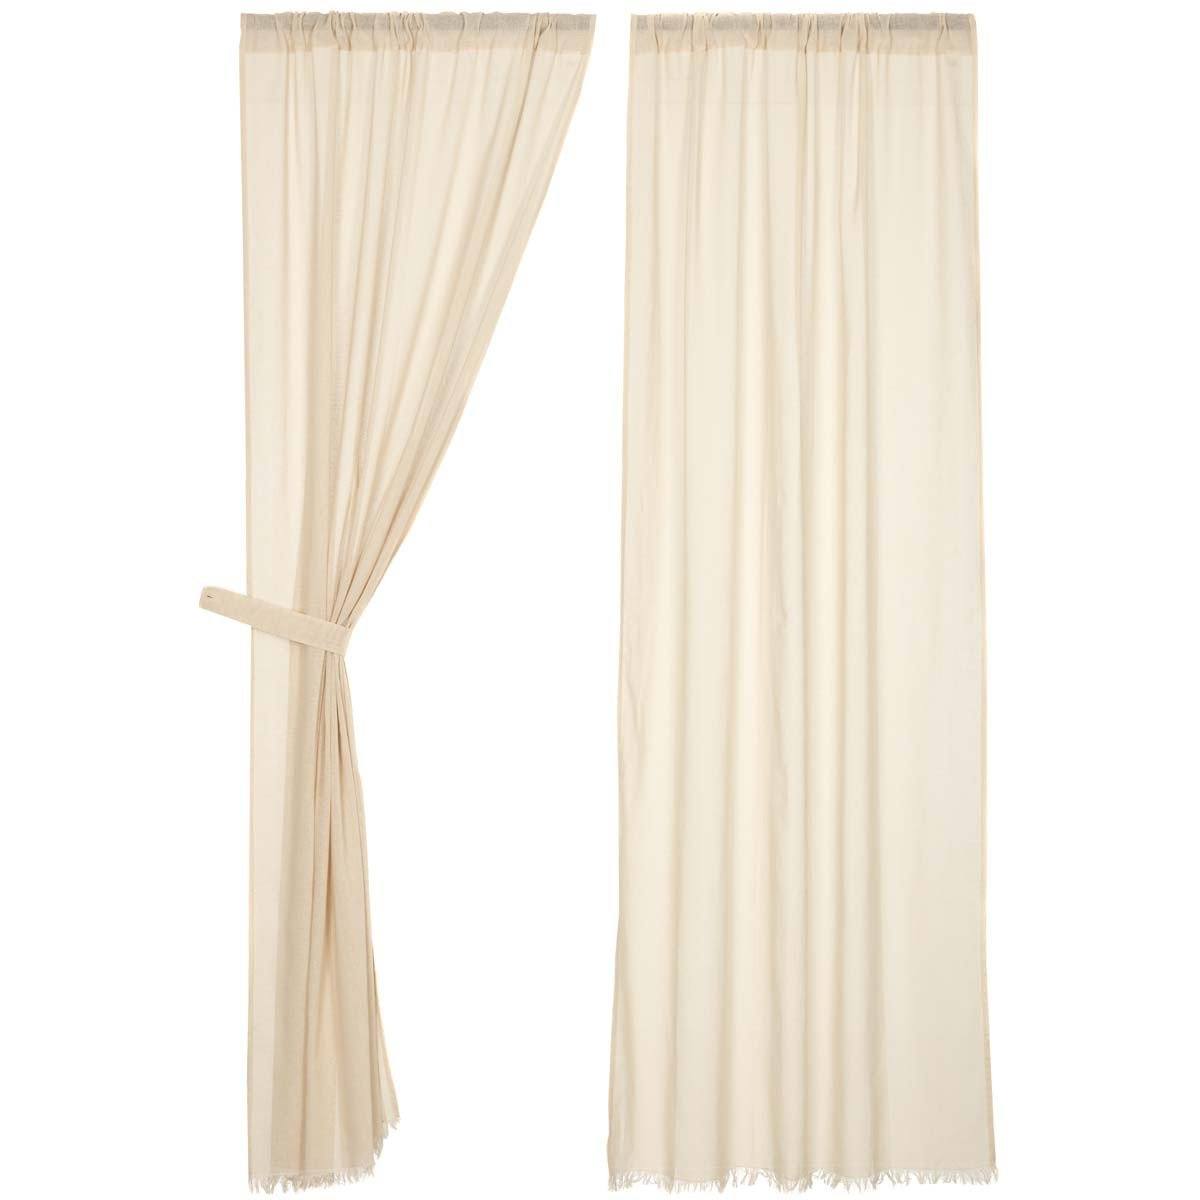 Tobacco Cloth Natural Panel Curtain Fringed Set of 2 84x40 VHC Brands - The Fox Decor